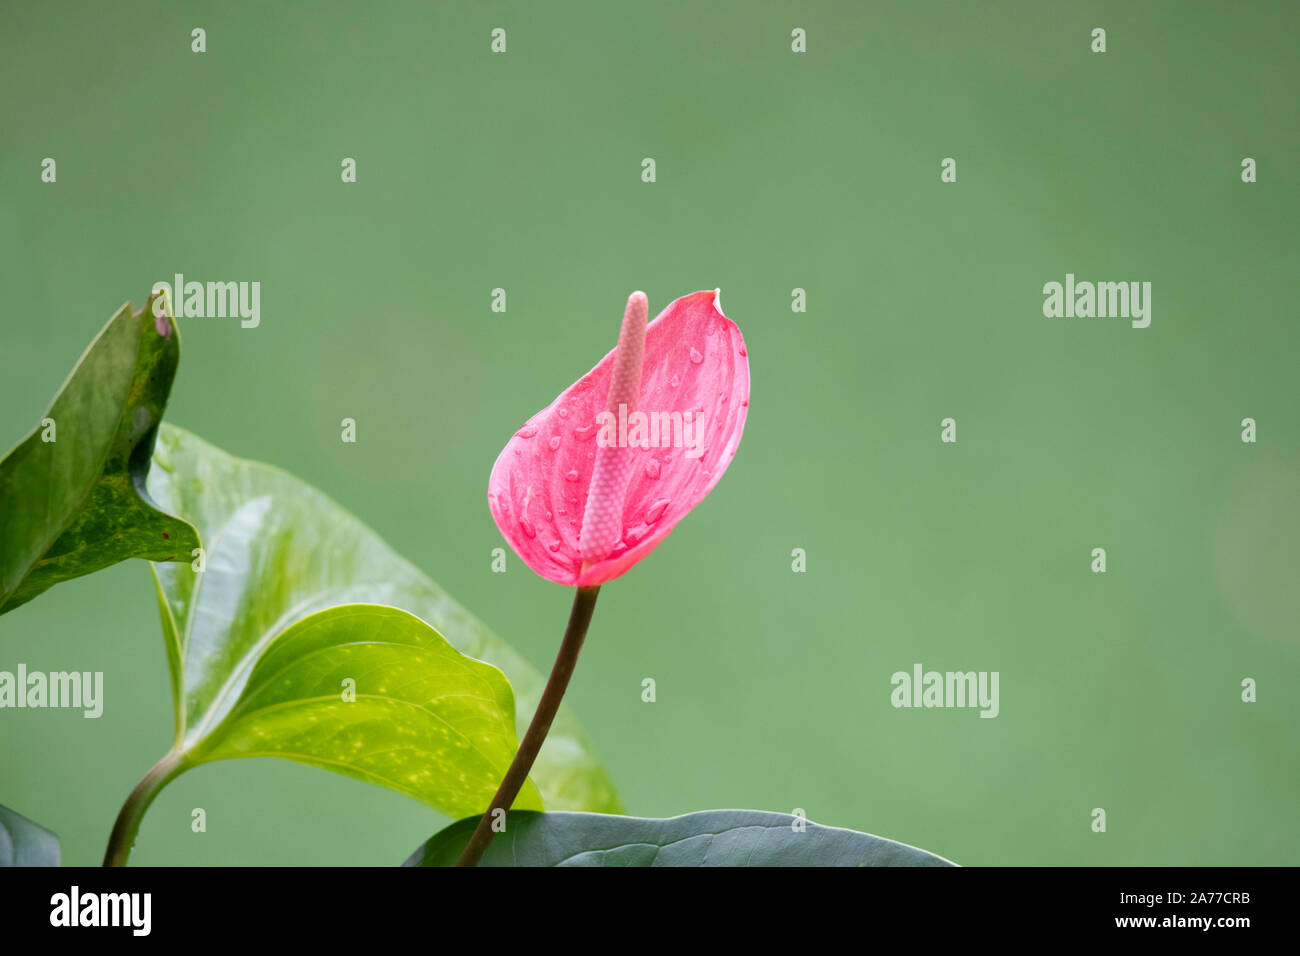 View of a beautiful Laceleaf or Anthurium flower with rain drops over a green background Stock Photo